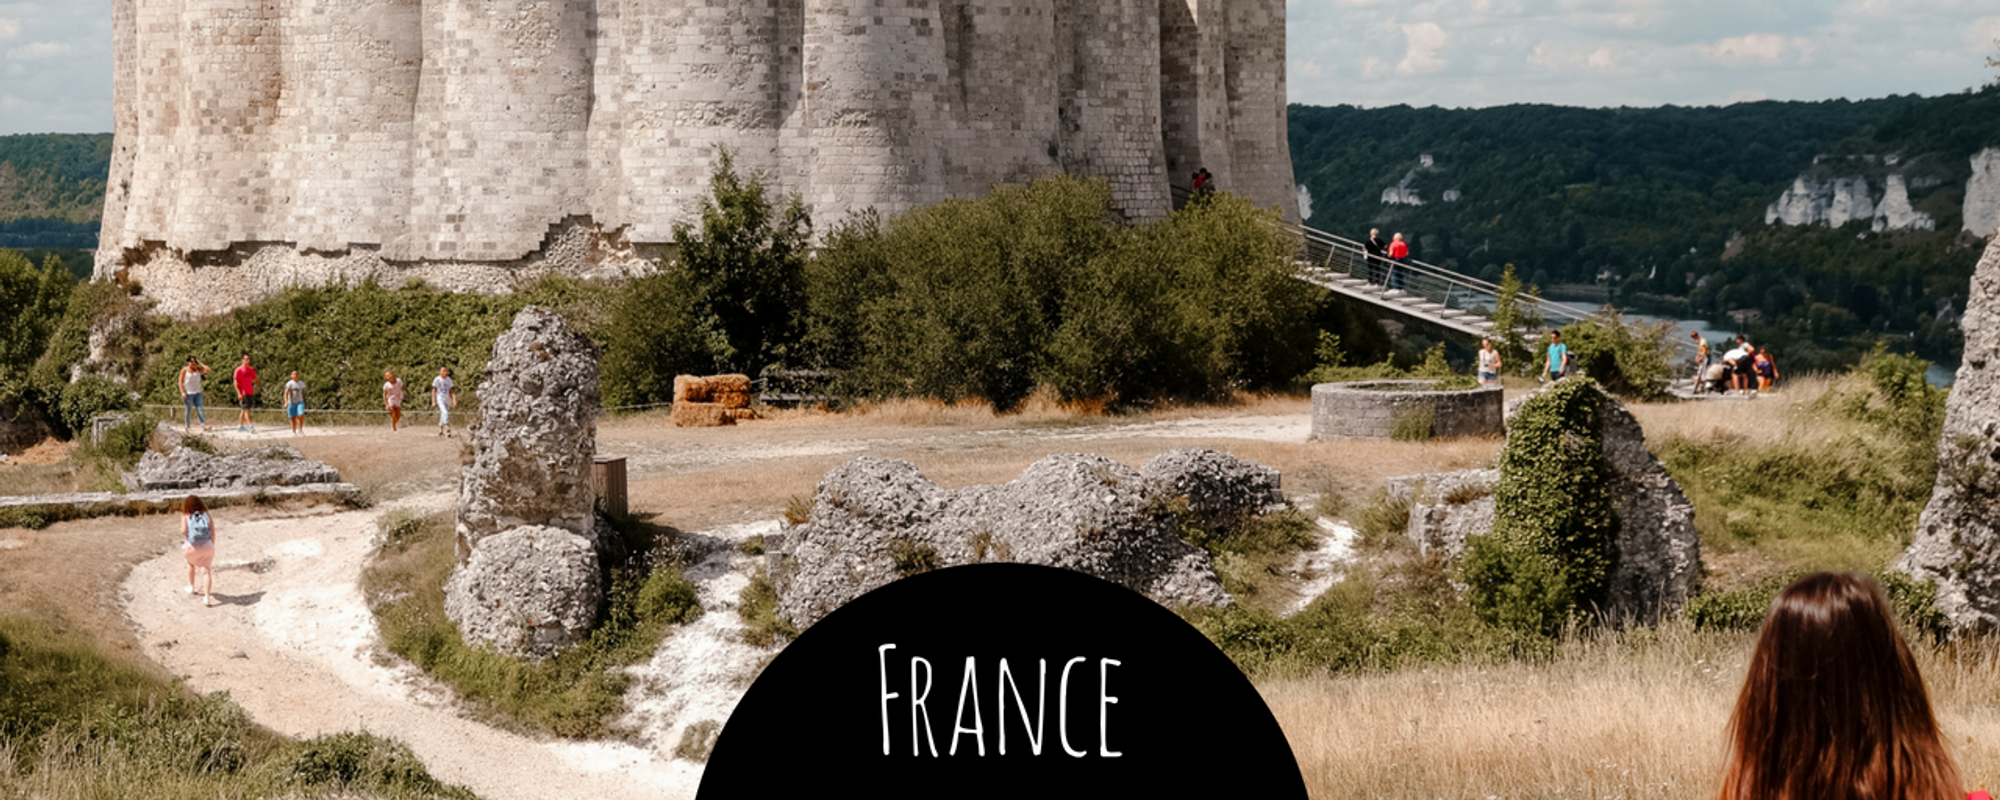 Discovering Normandy with our very first car ! -  Château-Gaillard, France